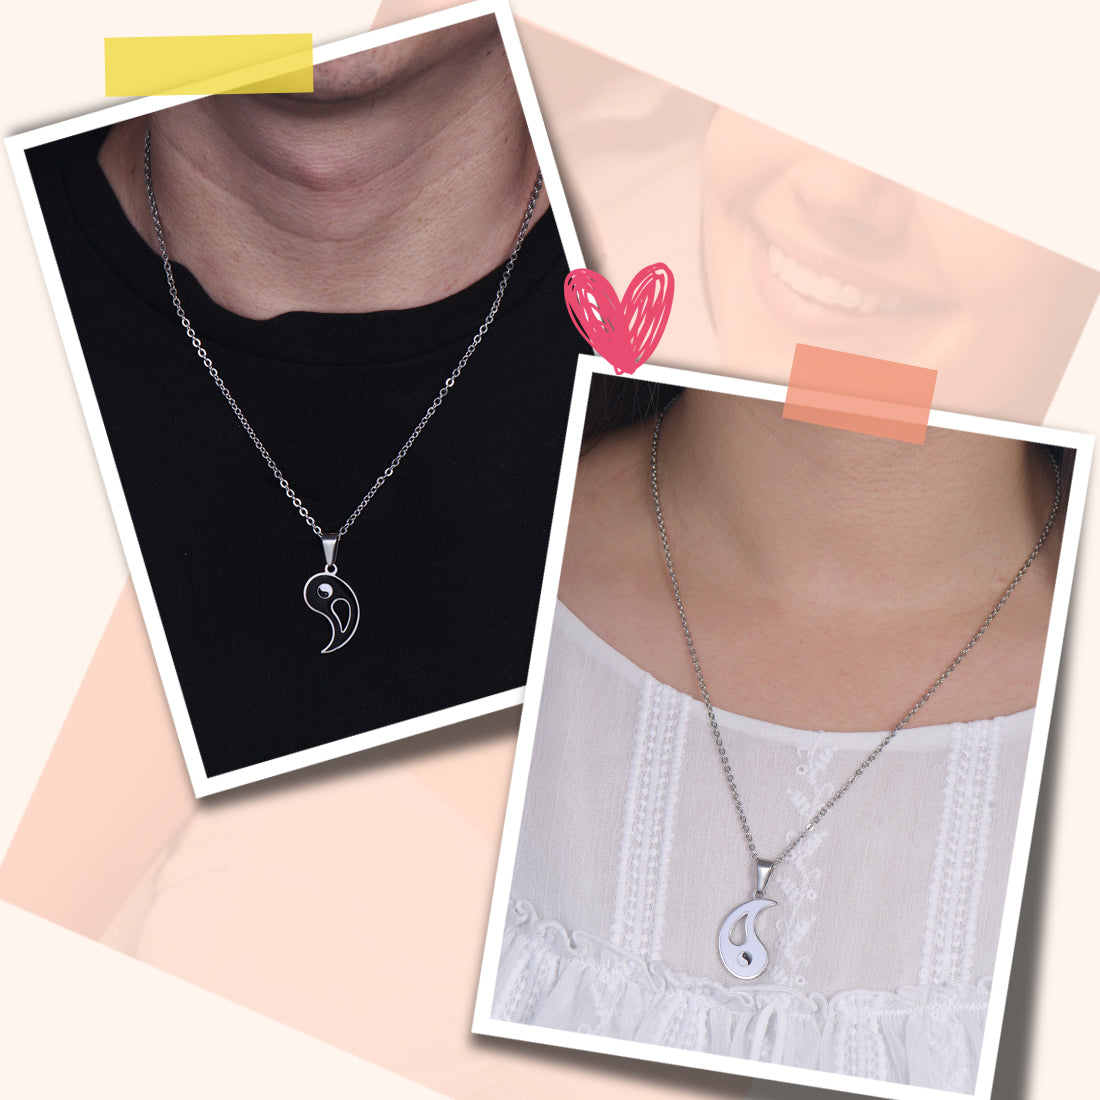 Proposal Season Sale Ends in 29th,July, FREE GIFT for order more than $900 get Get FREE Necklace